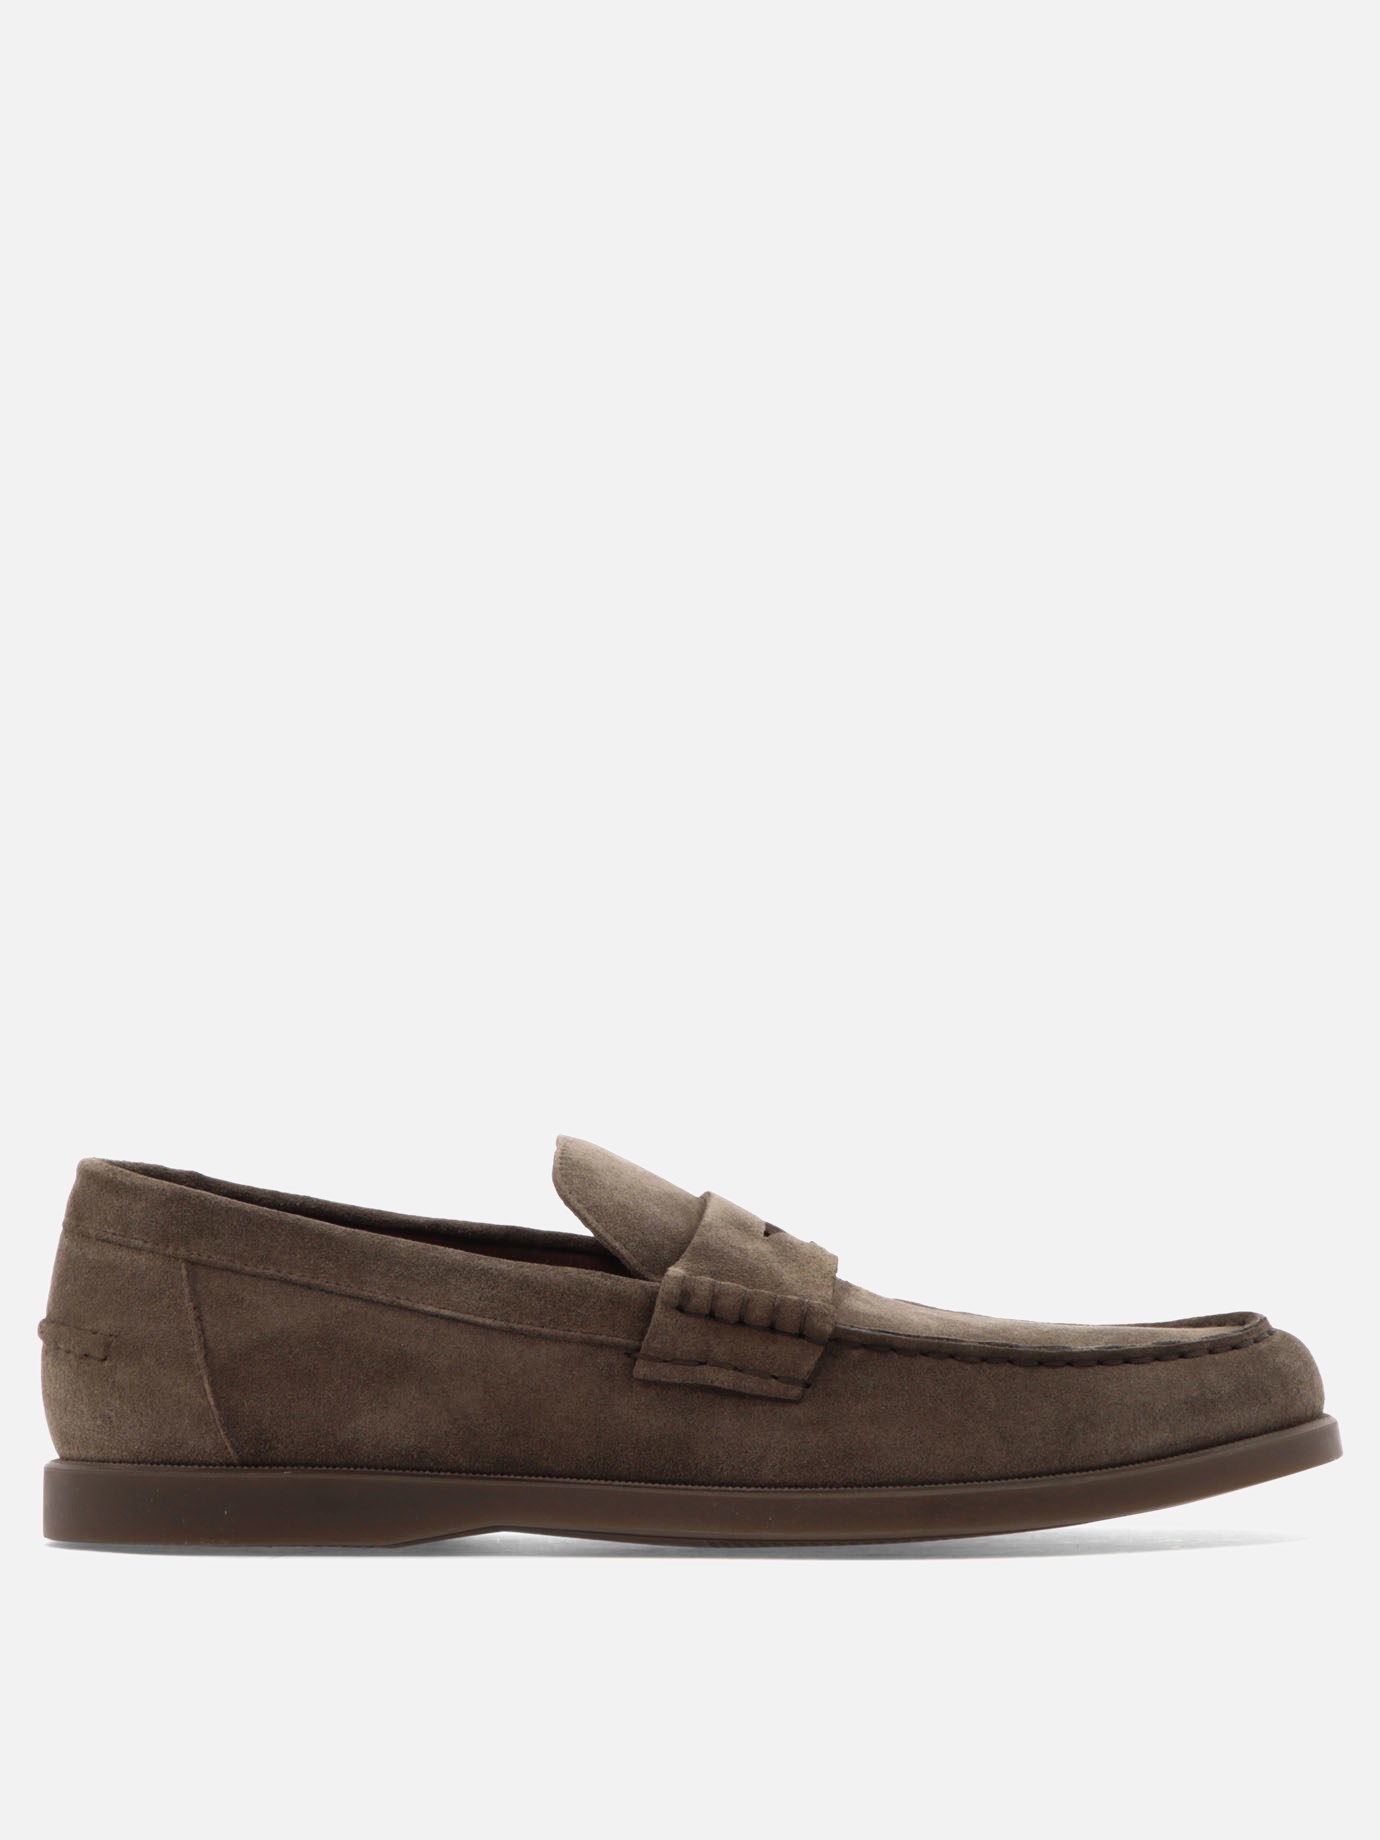  Wash  loafersby Doucal's - 3